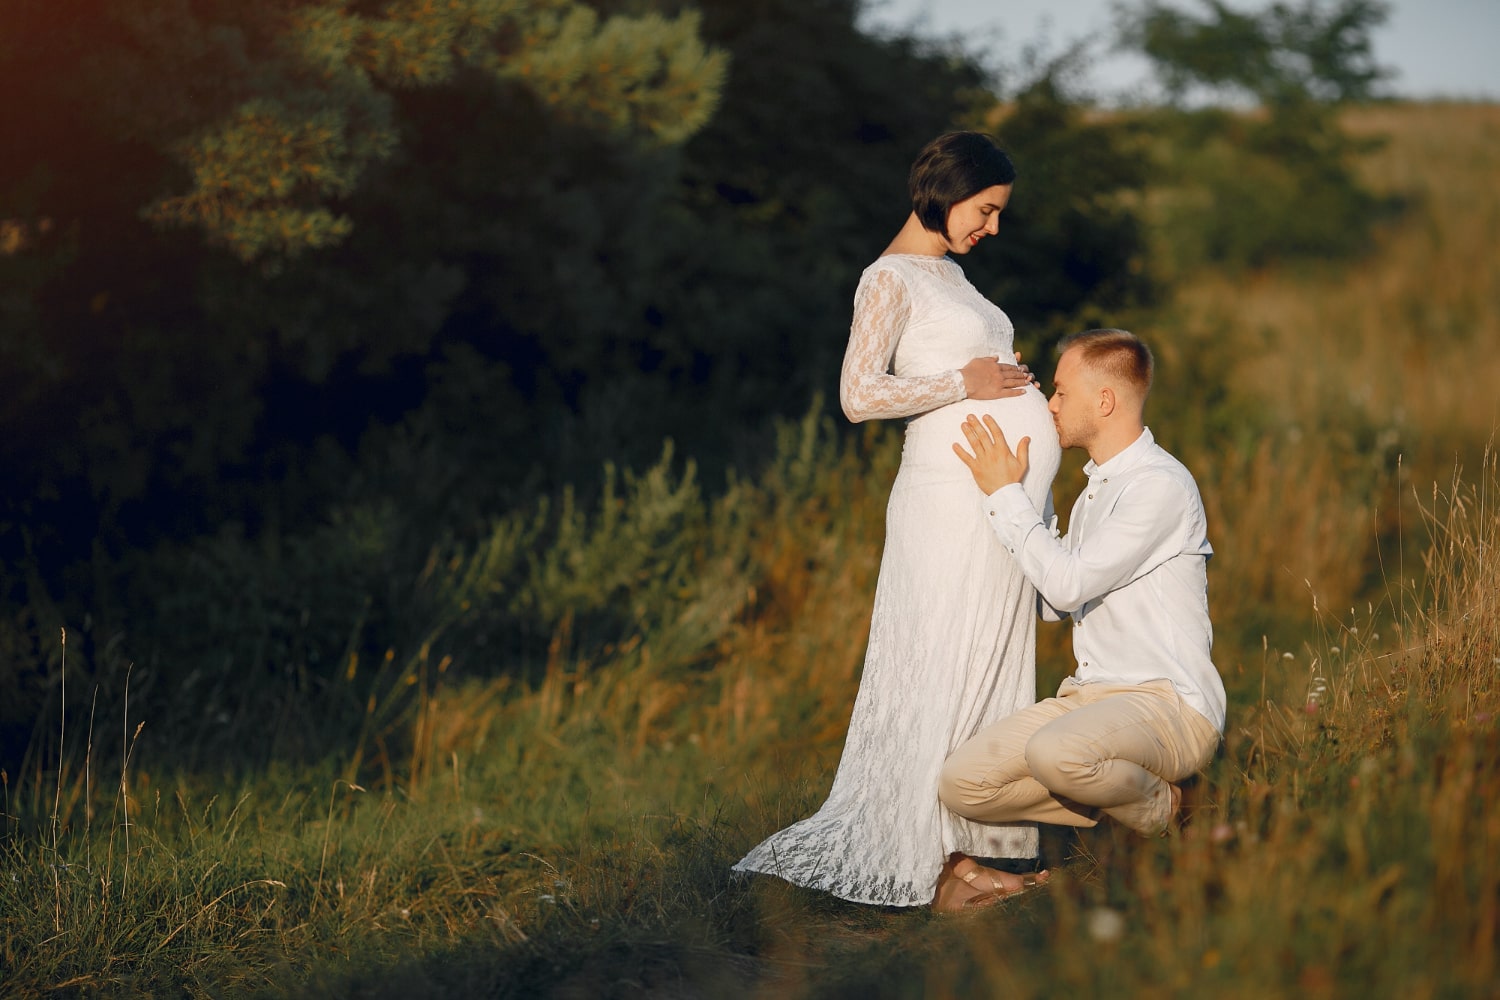 Togetherness in Maternity Photos: Celebrating Family Bonds